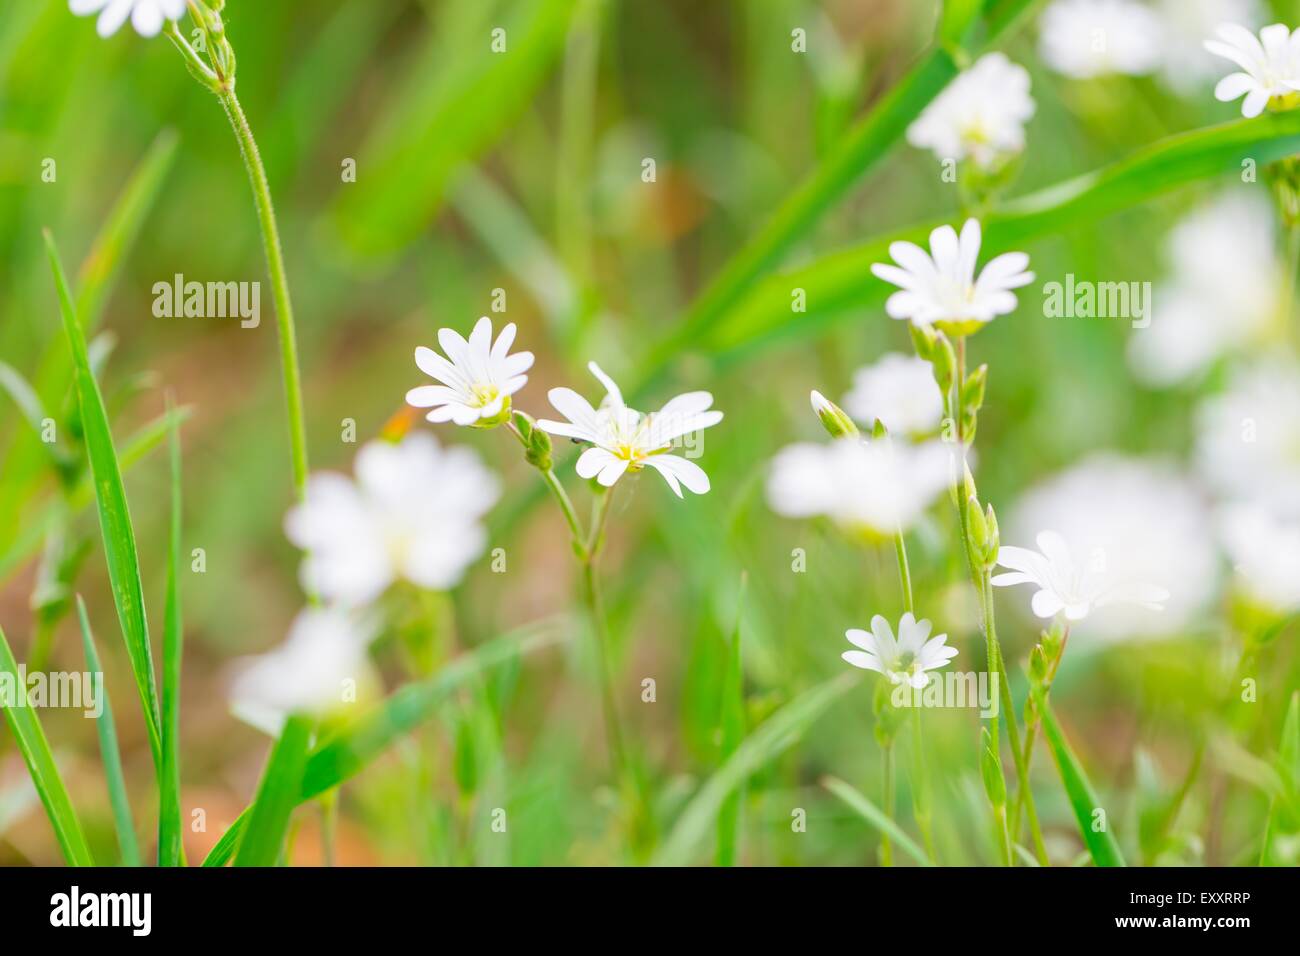 Blooming white flowers of chickweed in green grass. Nature springtime flowers background. Stock Photo